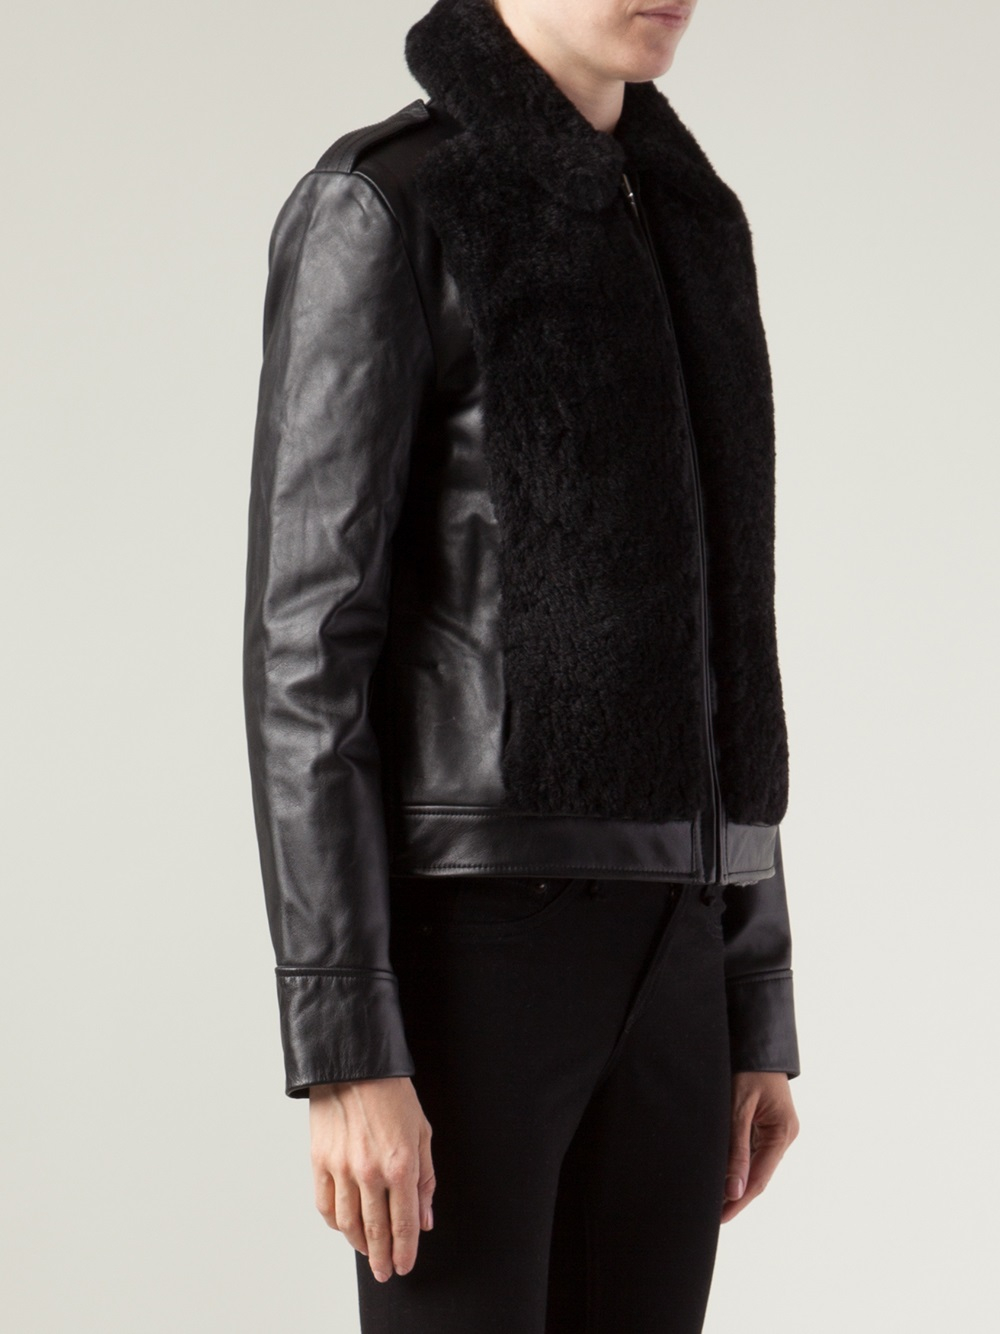 Lyst - T By Alexander Wang Grizzly Shearling Moto Jacket in Black